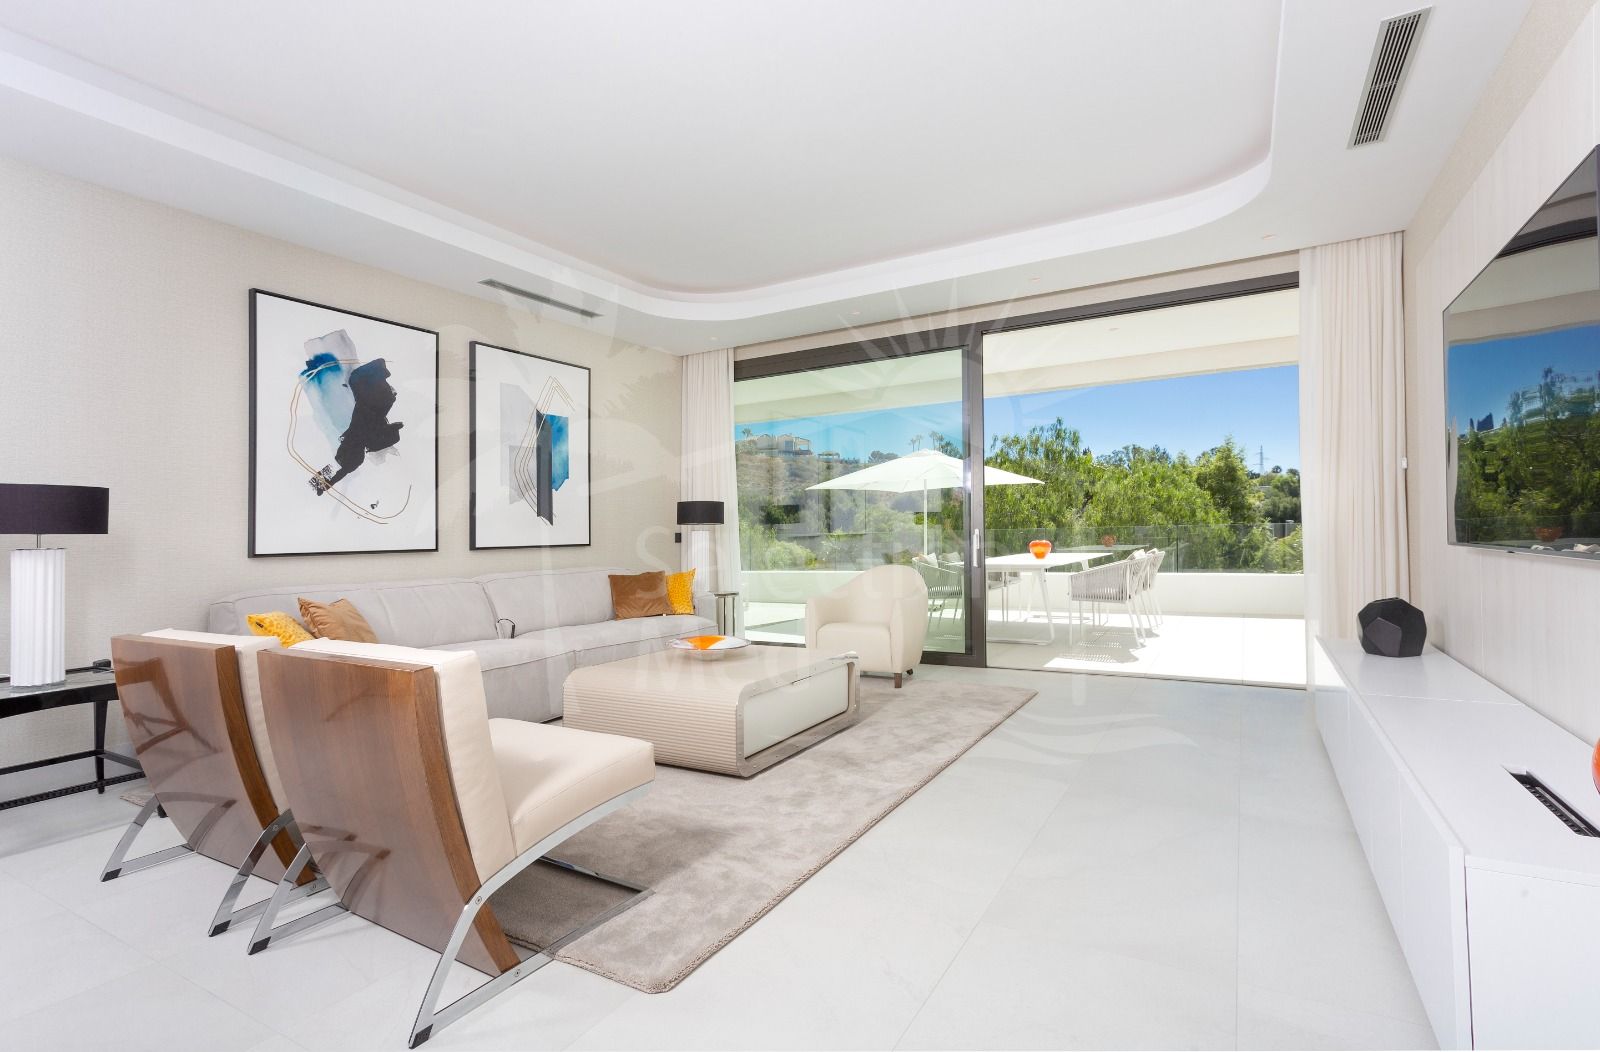 Exclusive living in a safe, prime location in the Golden Mile, Marbella